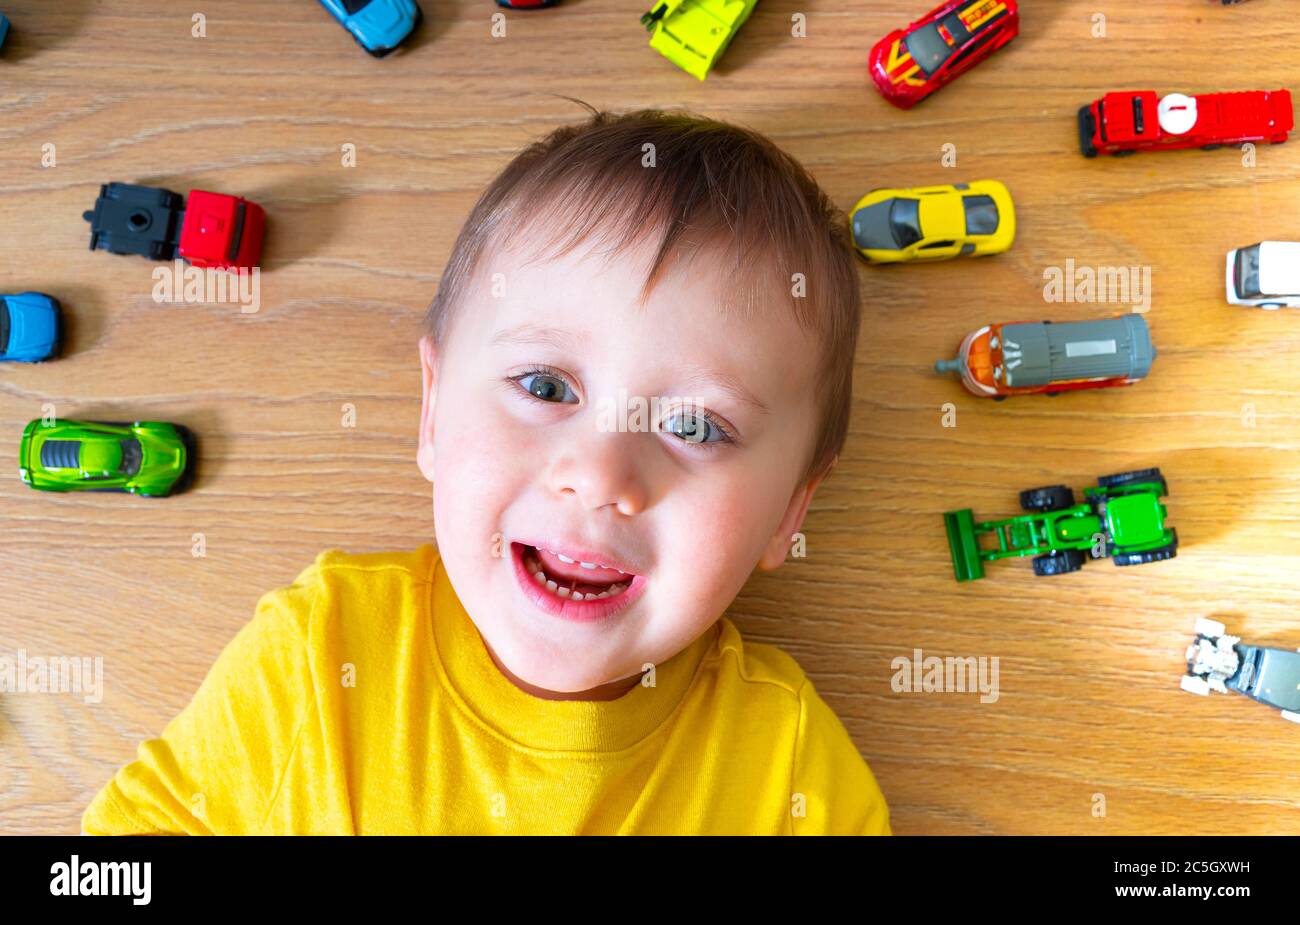 Cute little  kid boy playing with lots of toy cars indoor. Child wearing yellow shirt. Happy preschooler having fun at home or nursery. Big collection Stock Photo